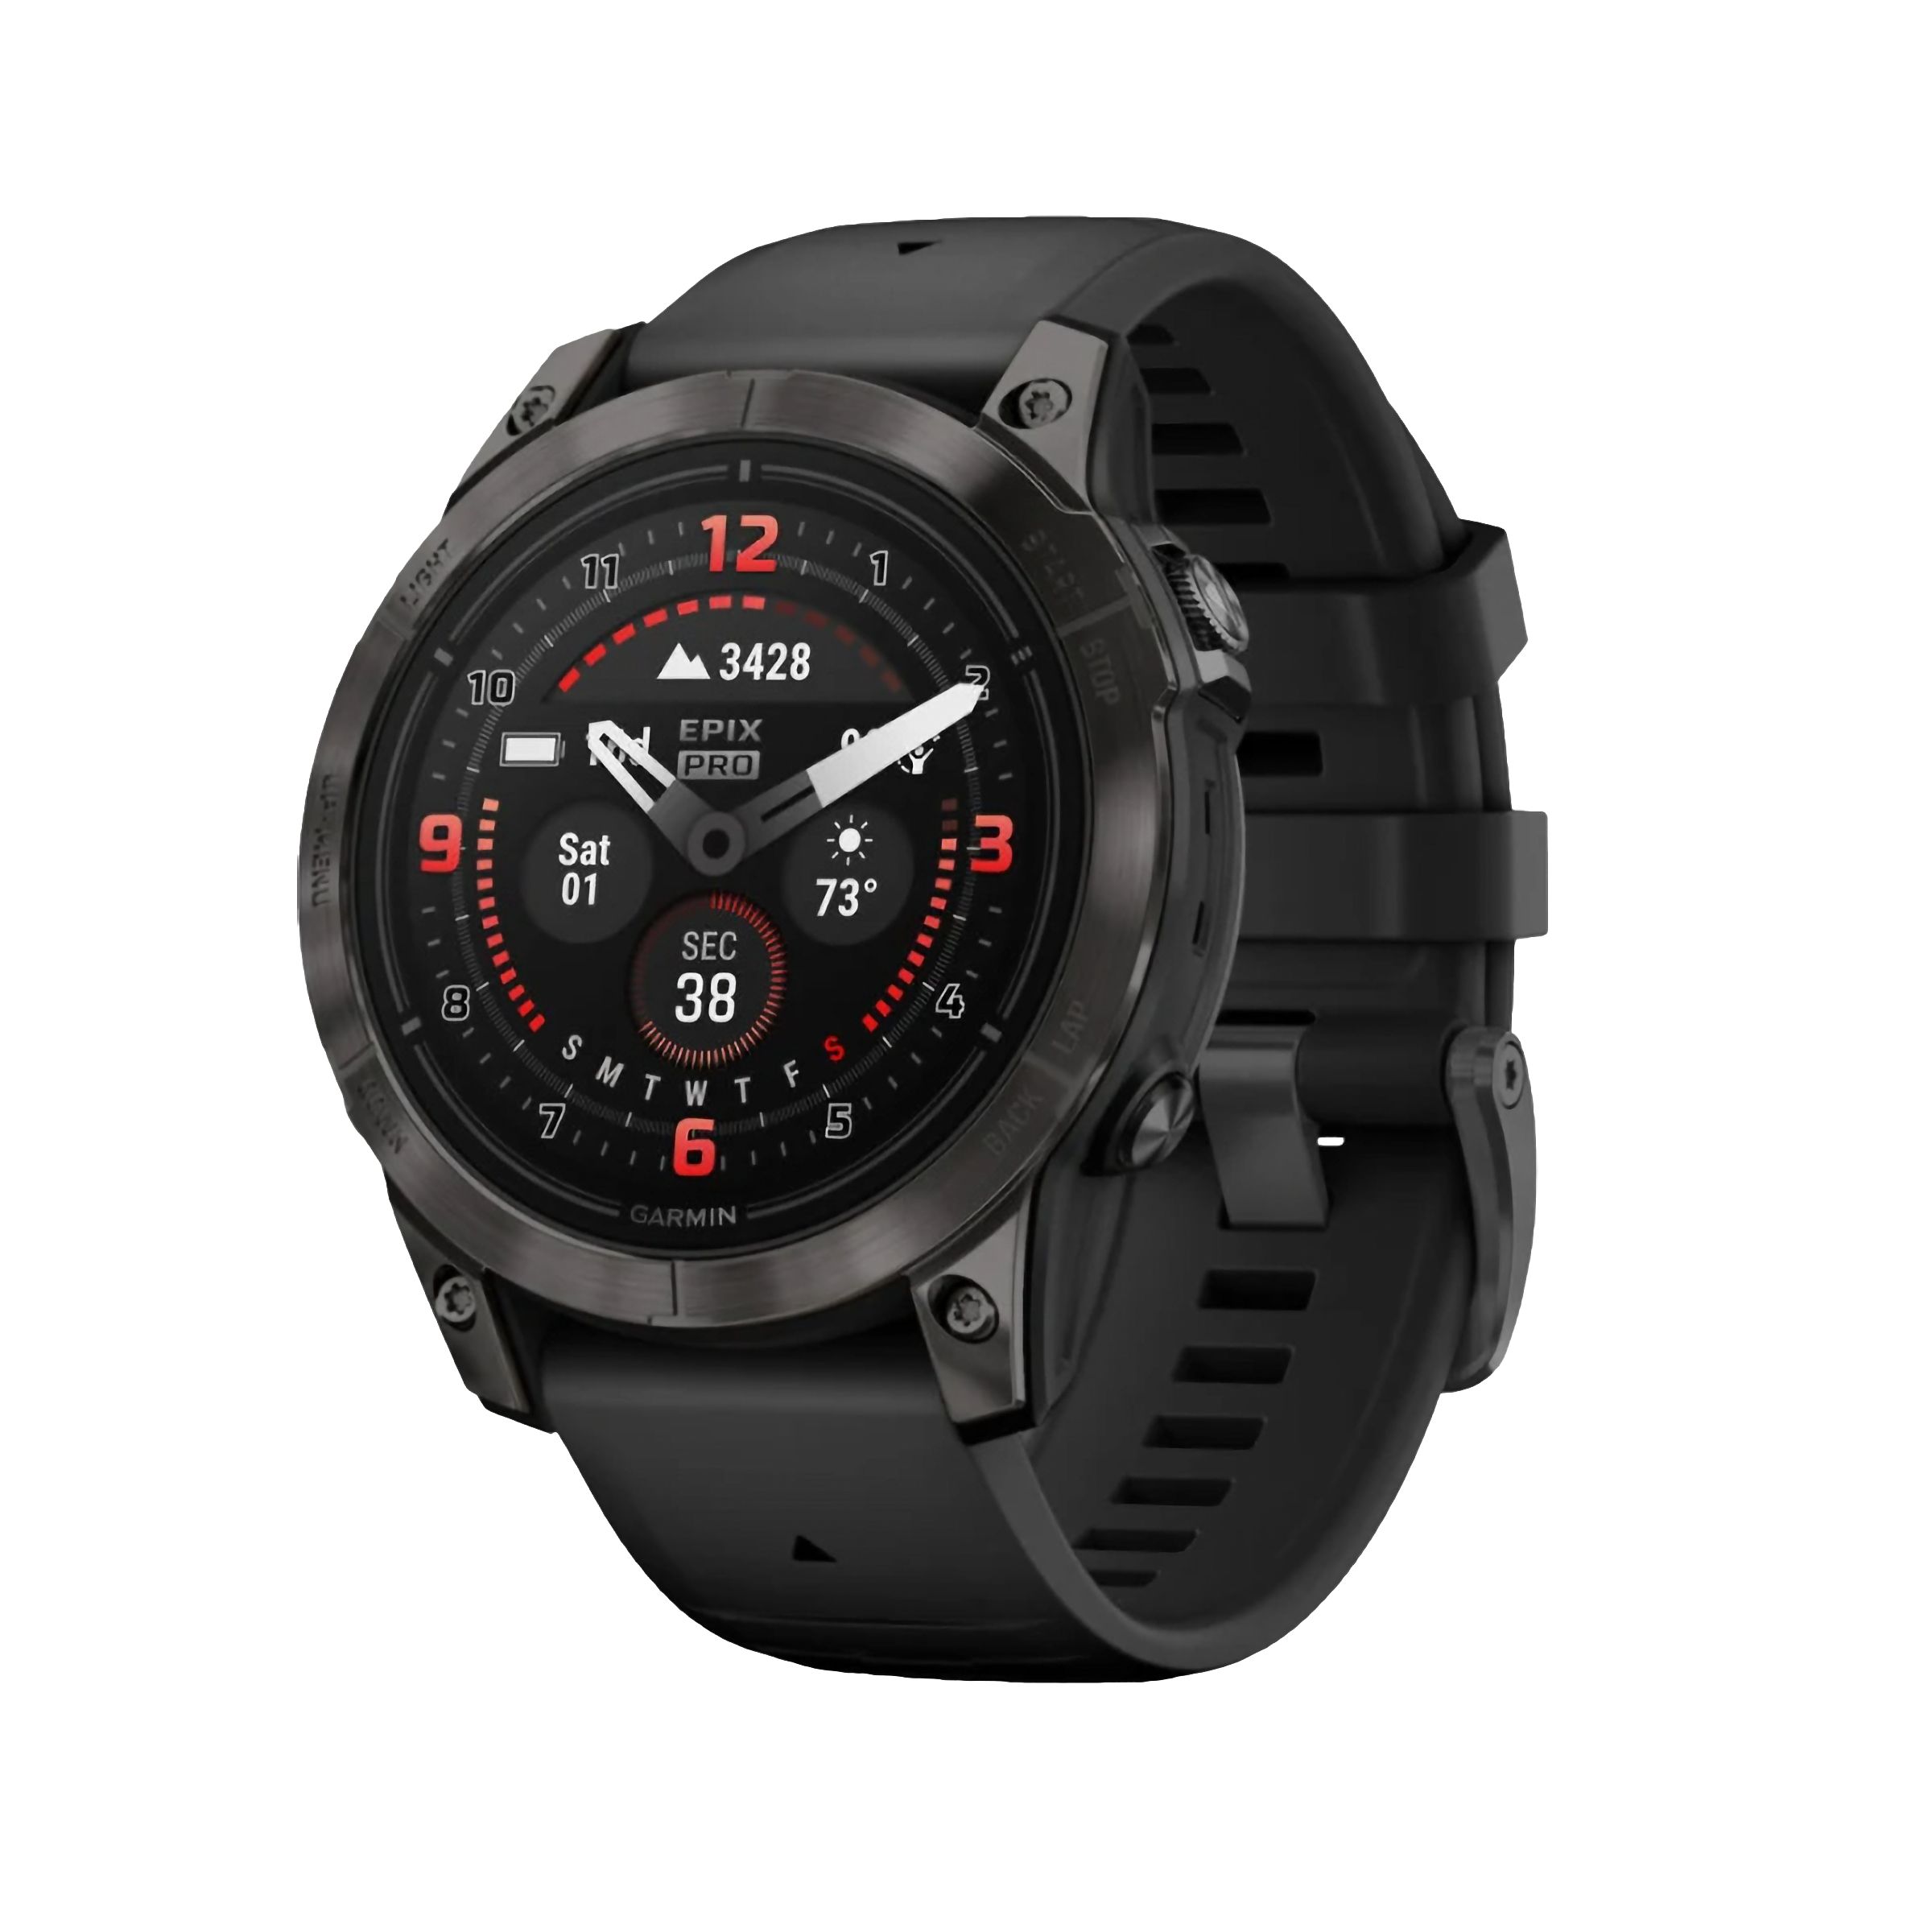 A black smartwatch with all black watch face and bands.